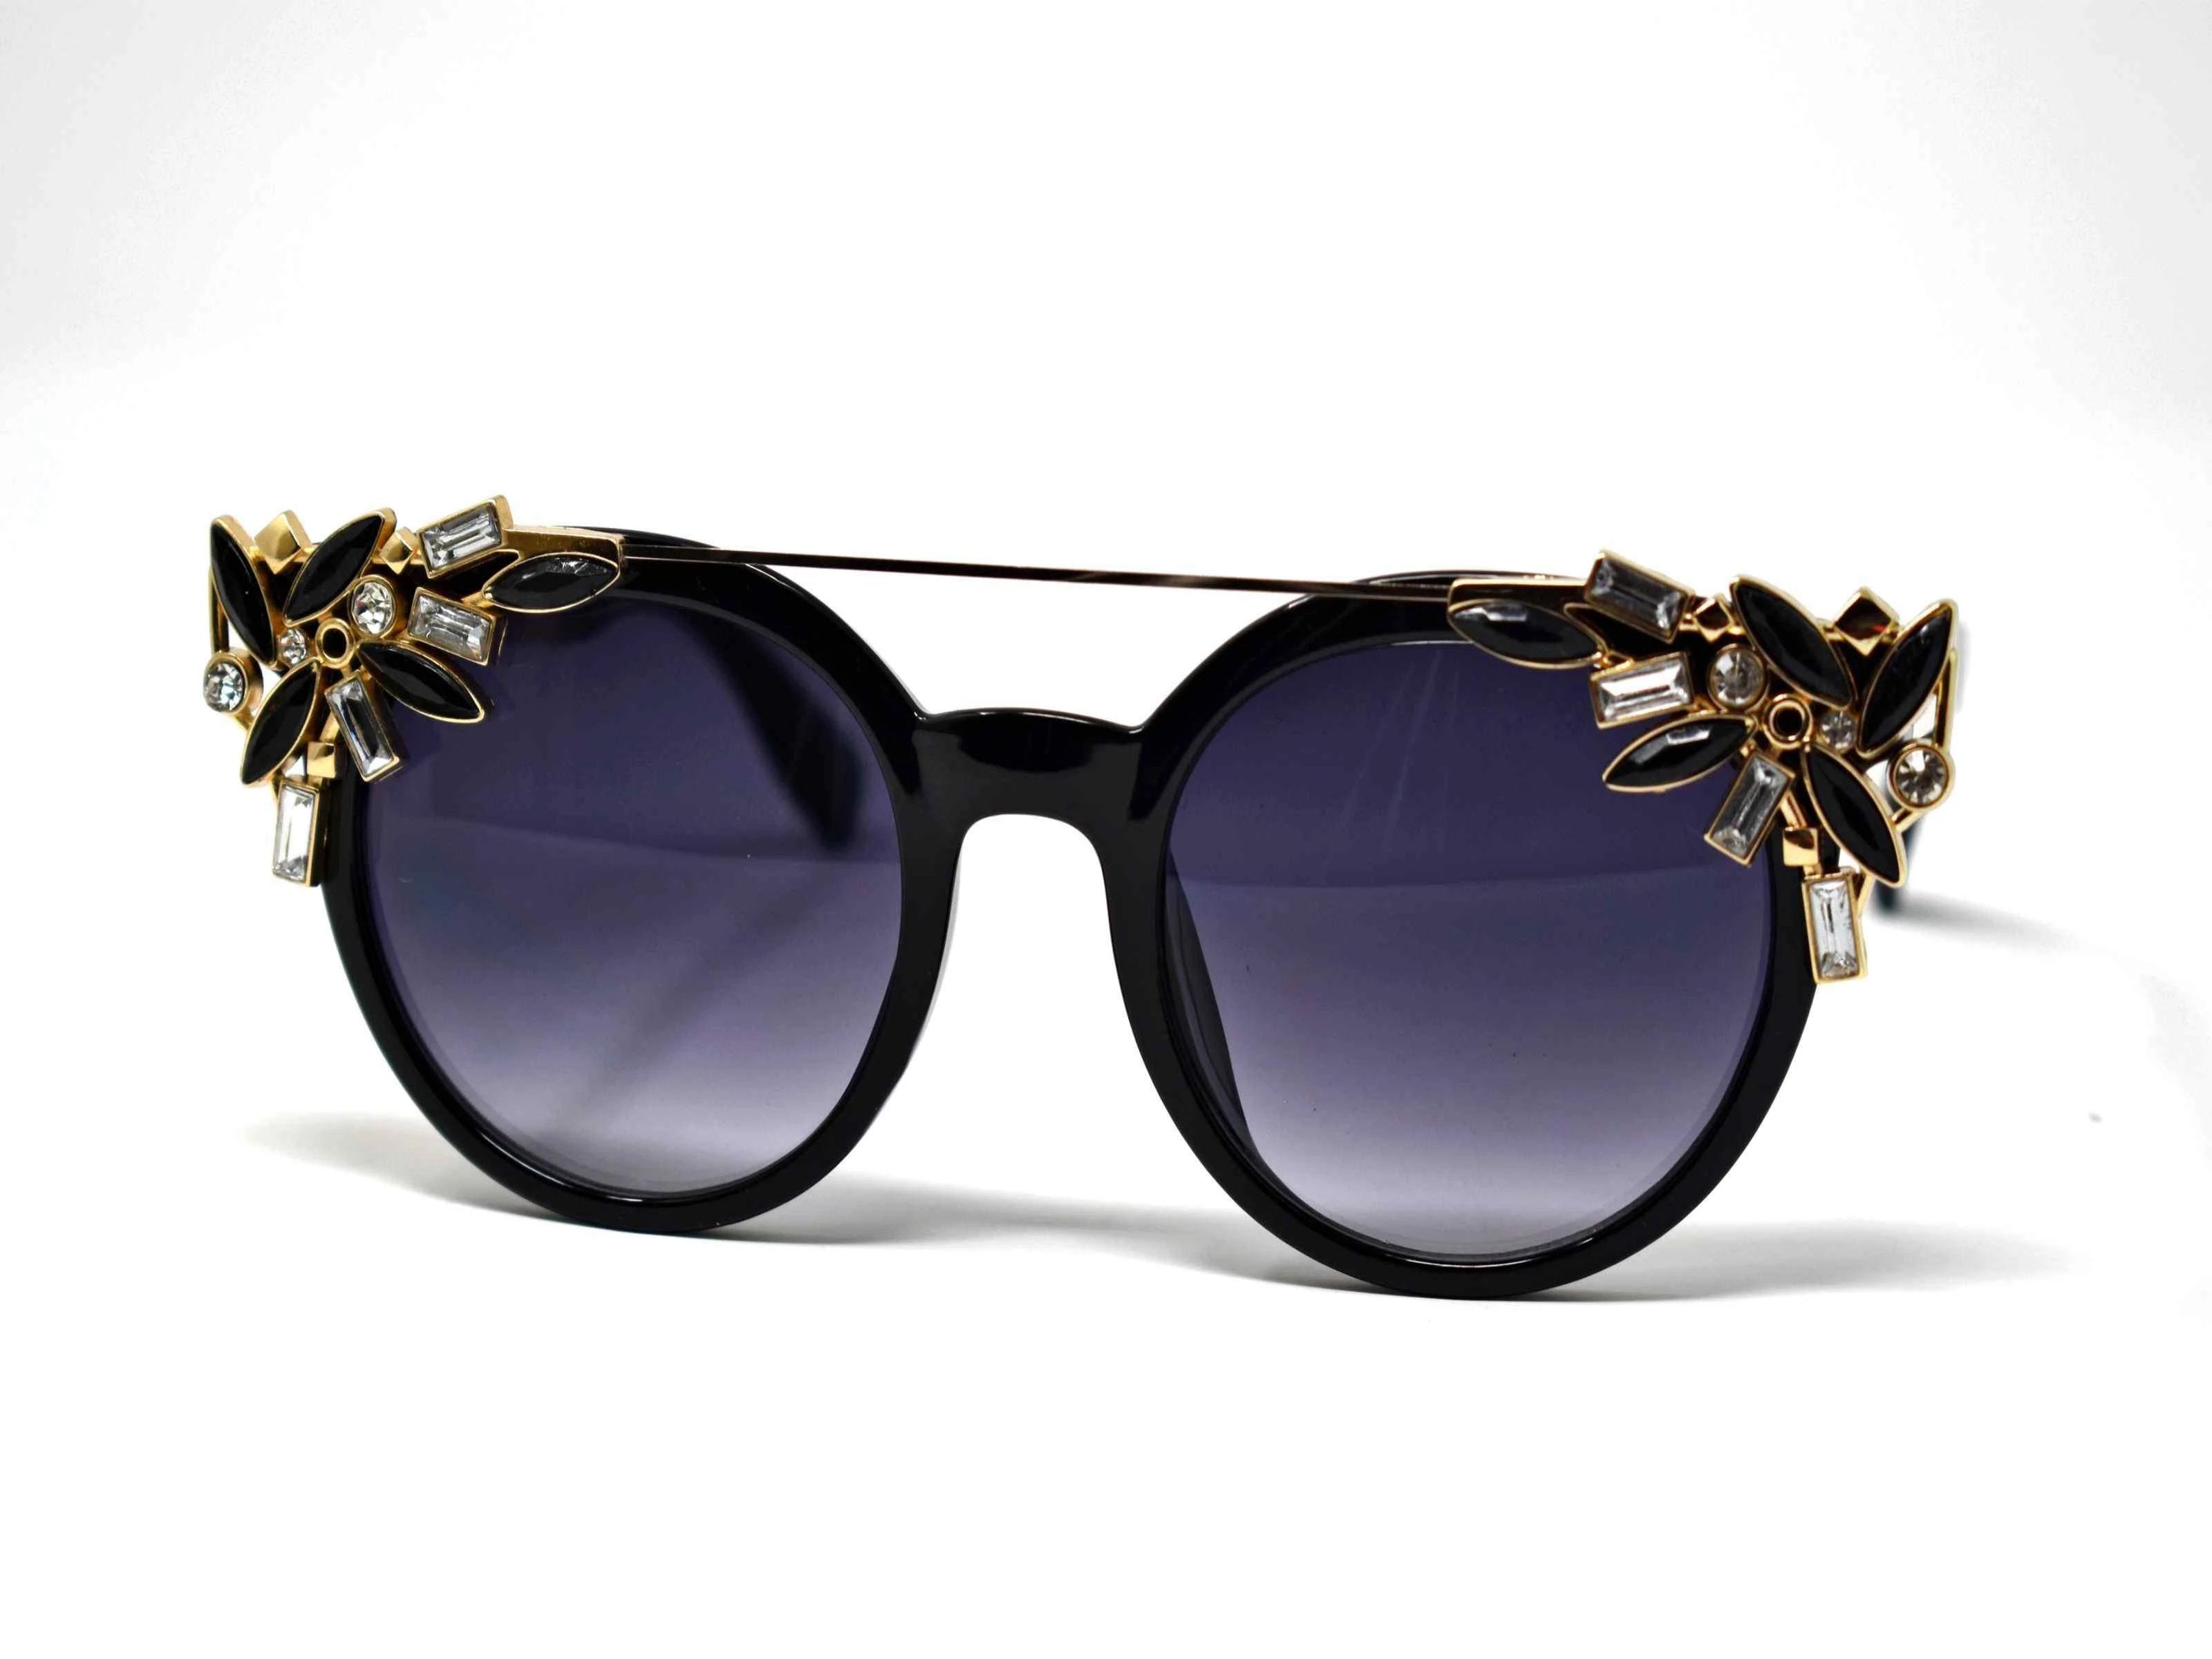 Trend setter and attention getter is what they will call you in these Pansy Black sunglasses with a sleek gold trim adorned in clear and black gems, in a pantos style frame.